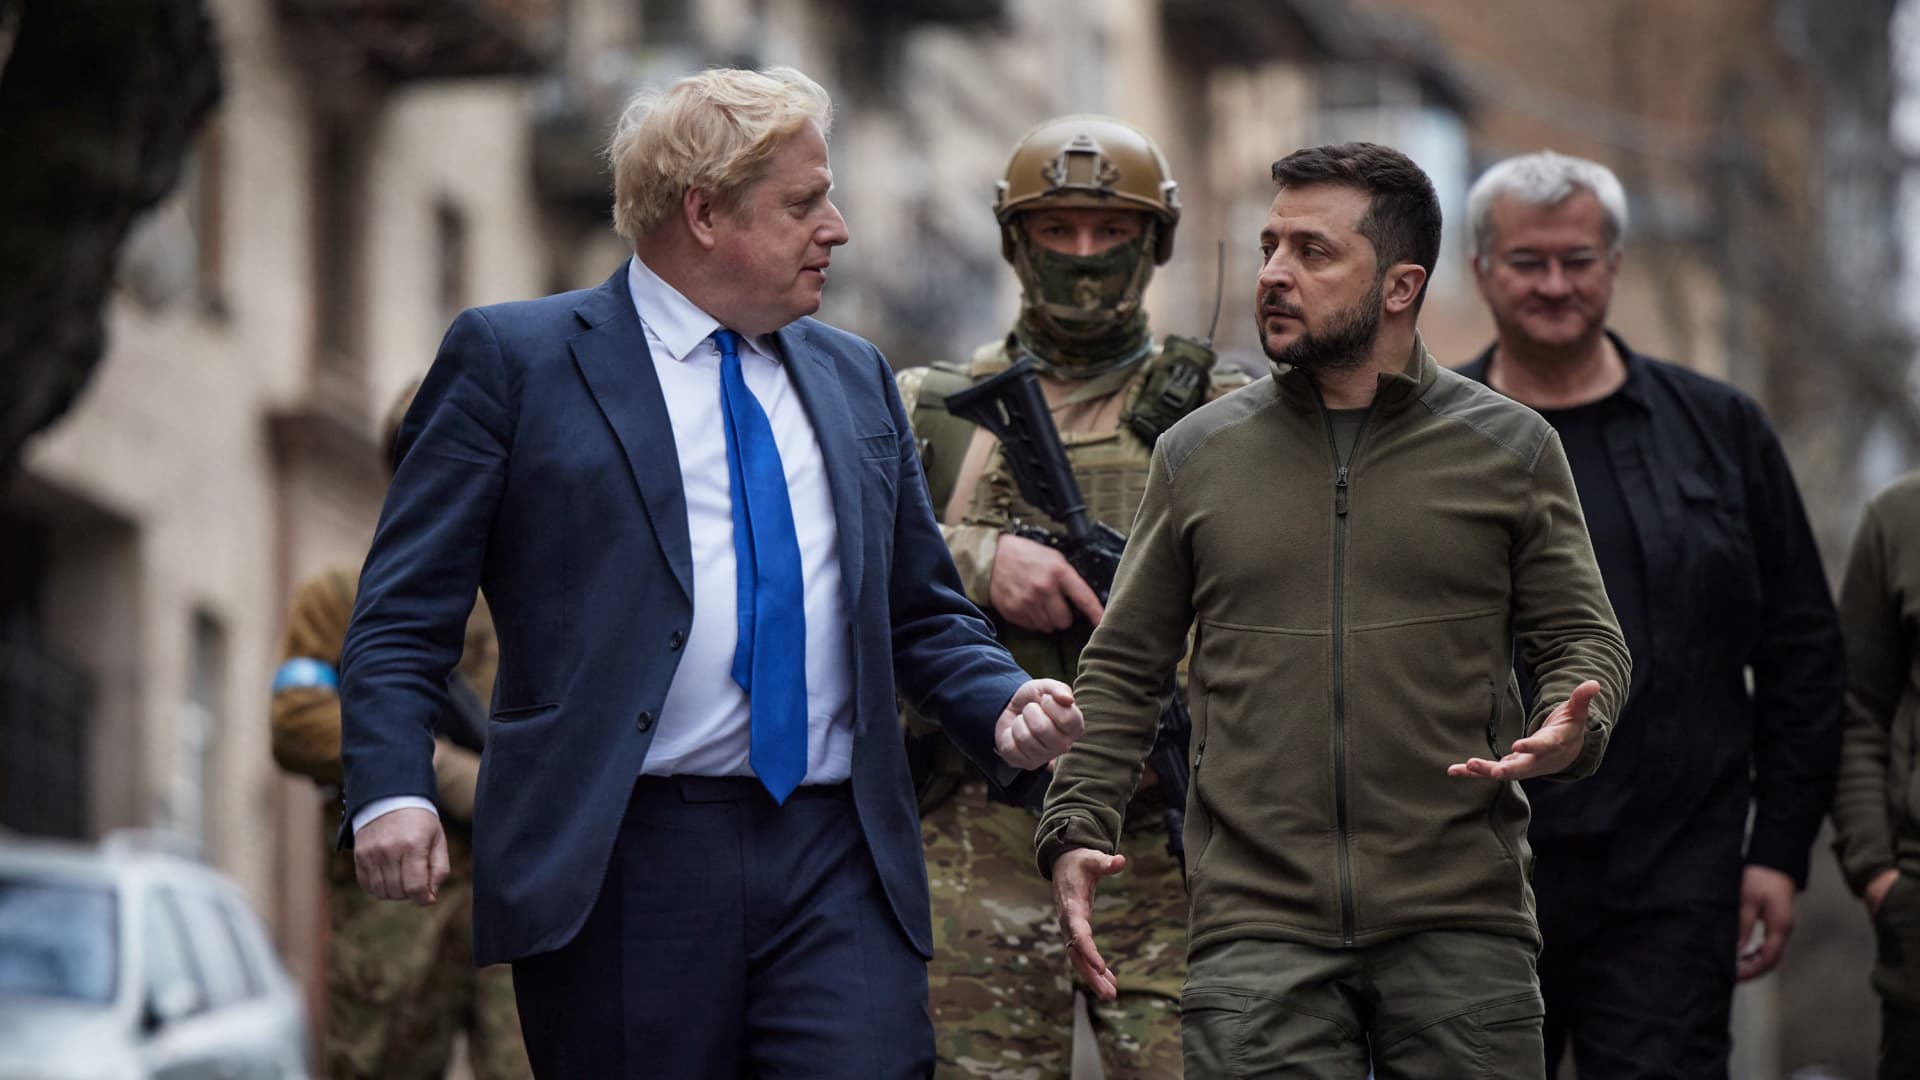 Ukraine's President Volodymyr Zelenskyy and British Prime Minister Boris Johnson walk at the Independence Square after a meeting, as Russia's attack on Ukraine continues, in Kyiv, Ukraine April 9, 2022.